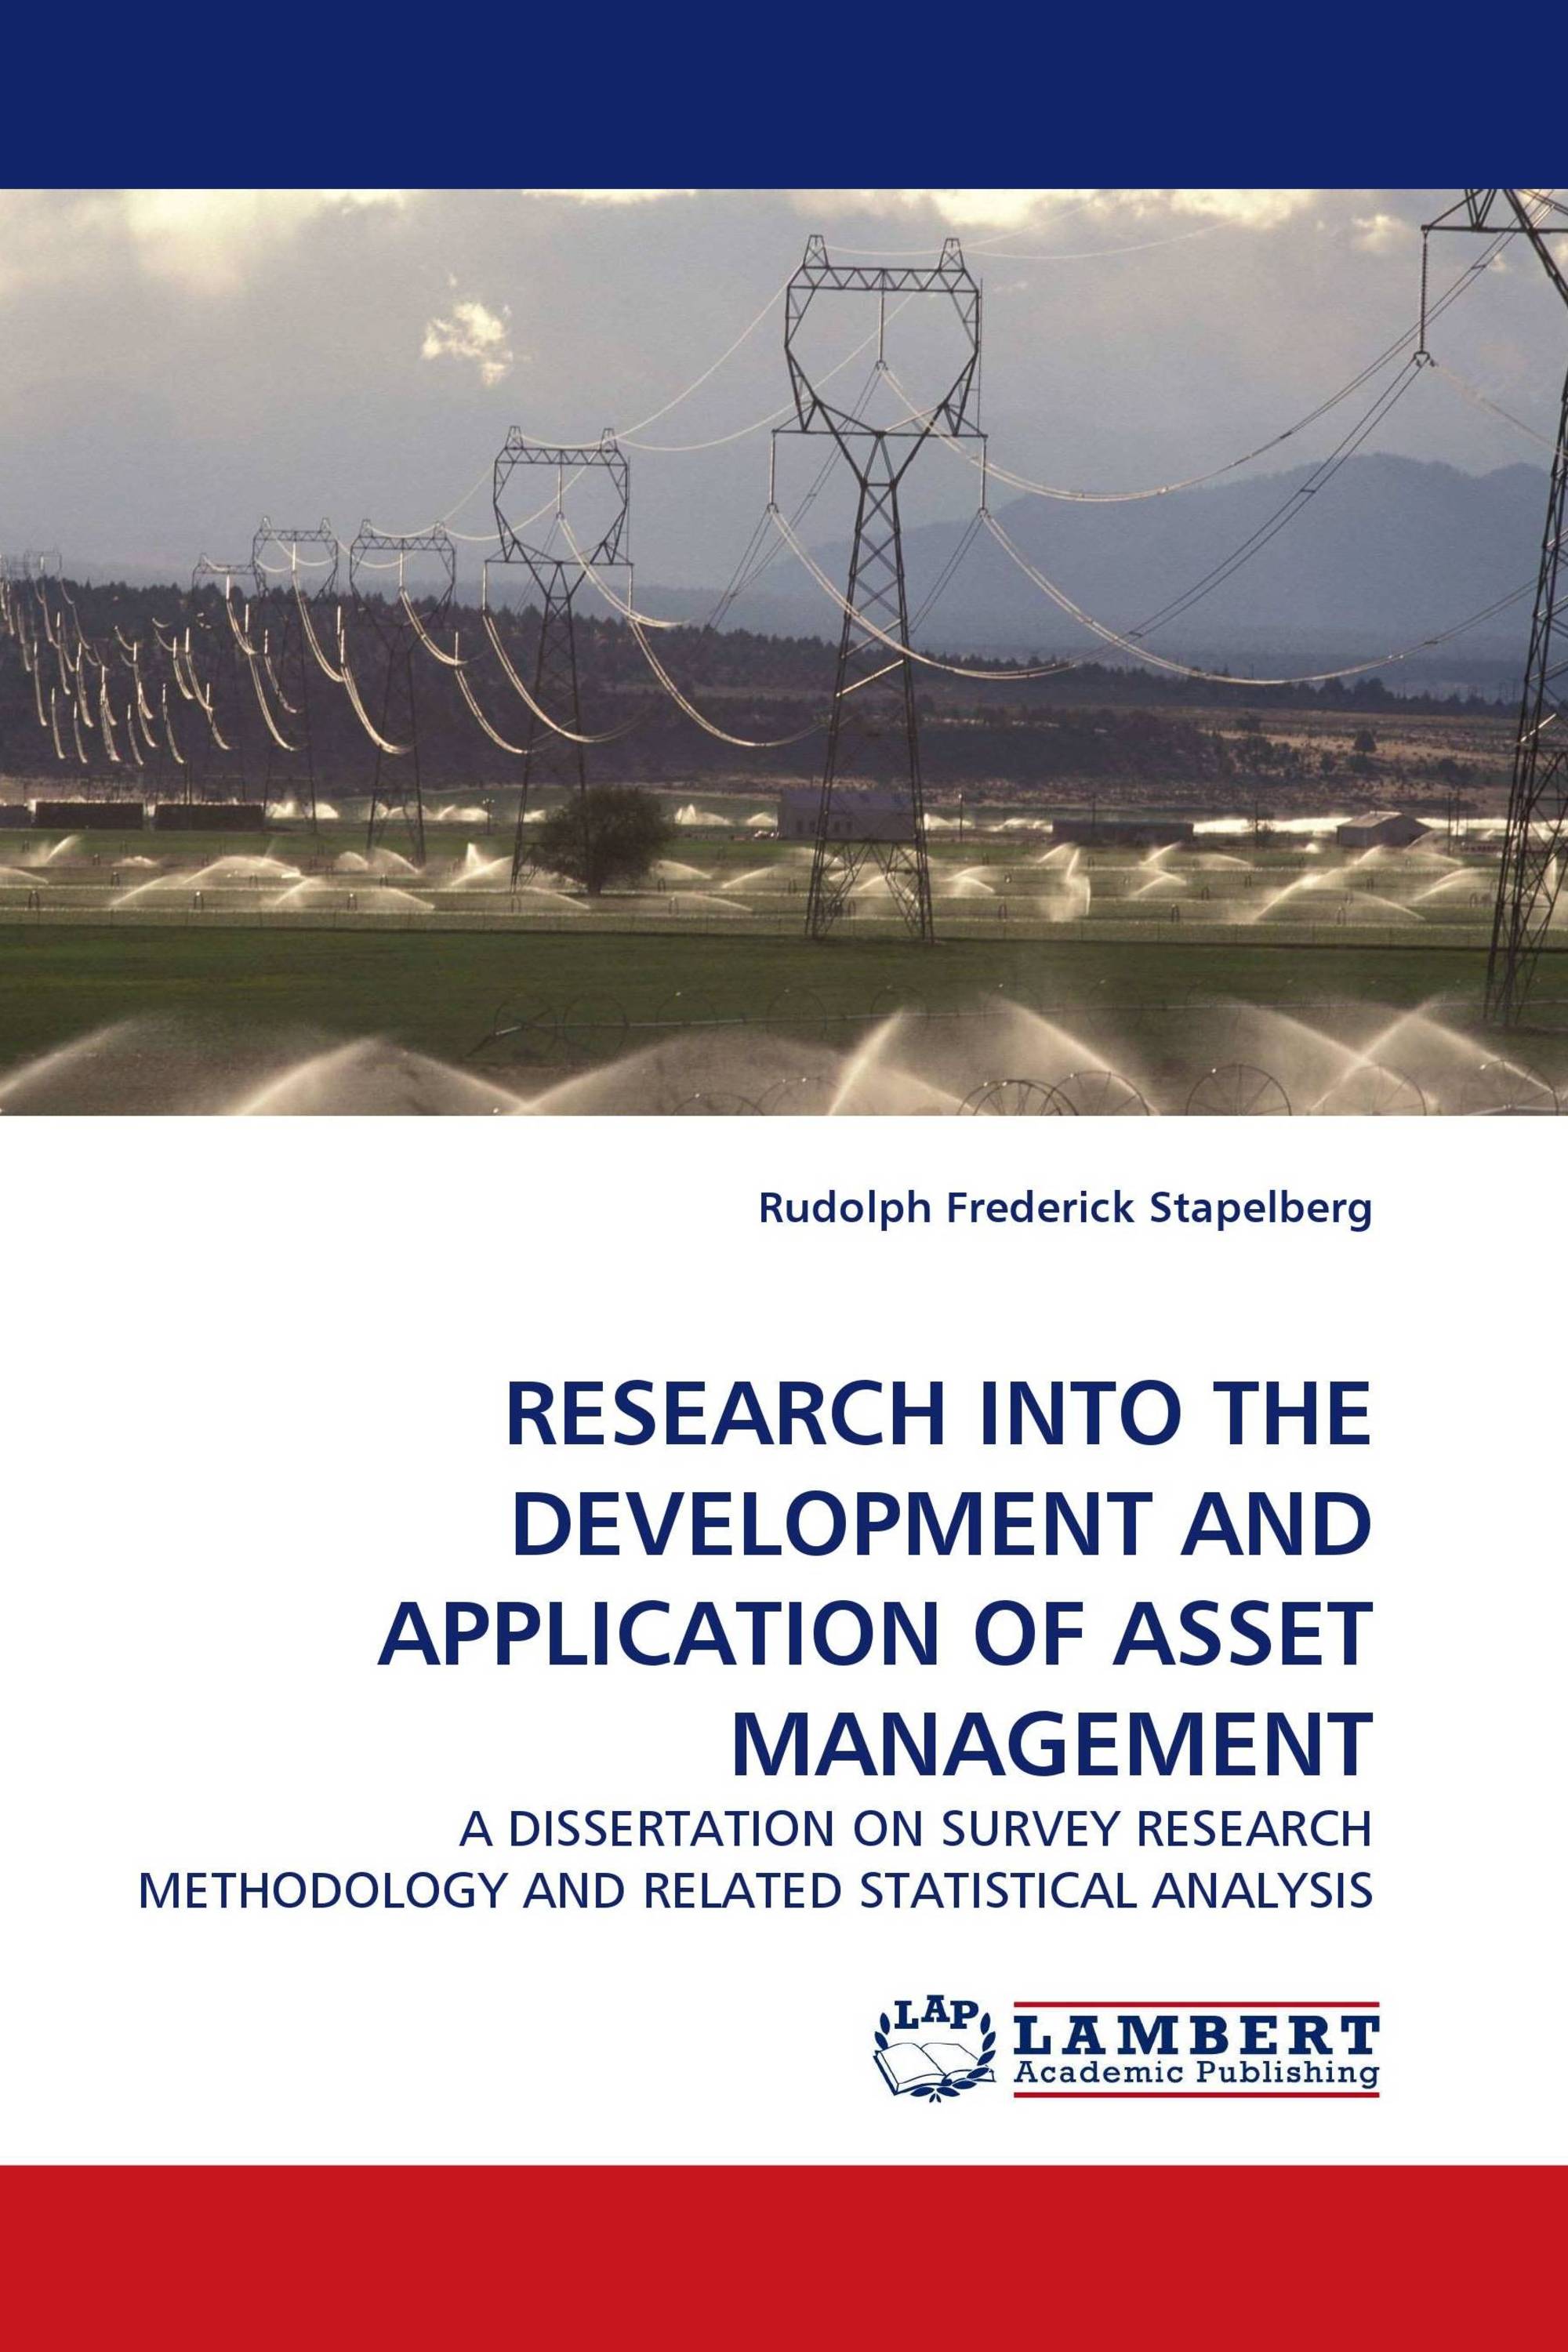 RESEARCH INTO THE DEVELOPMENT AND APPLICATION OF ASSET MANAGEMENT